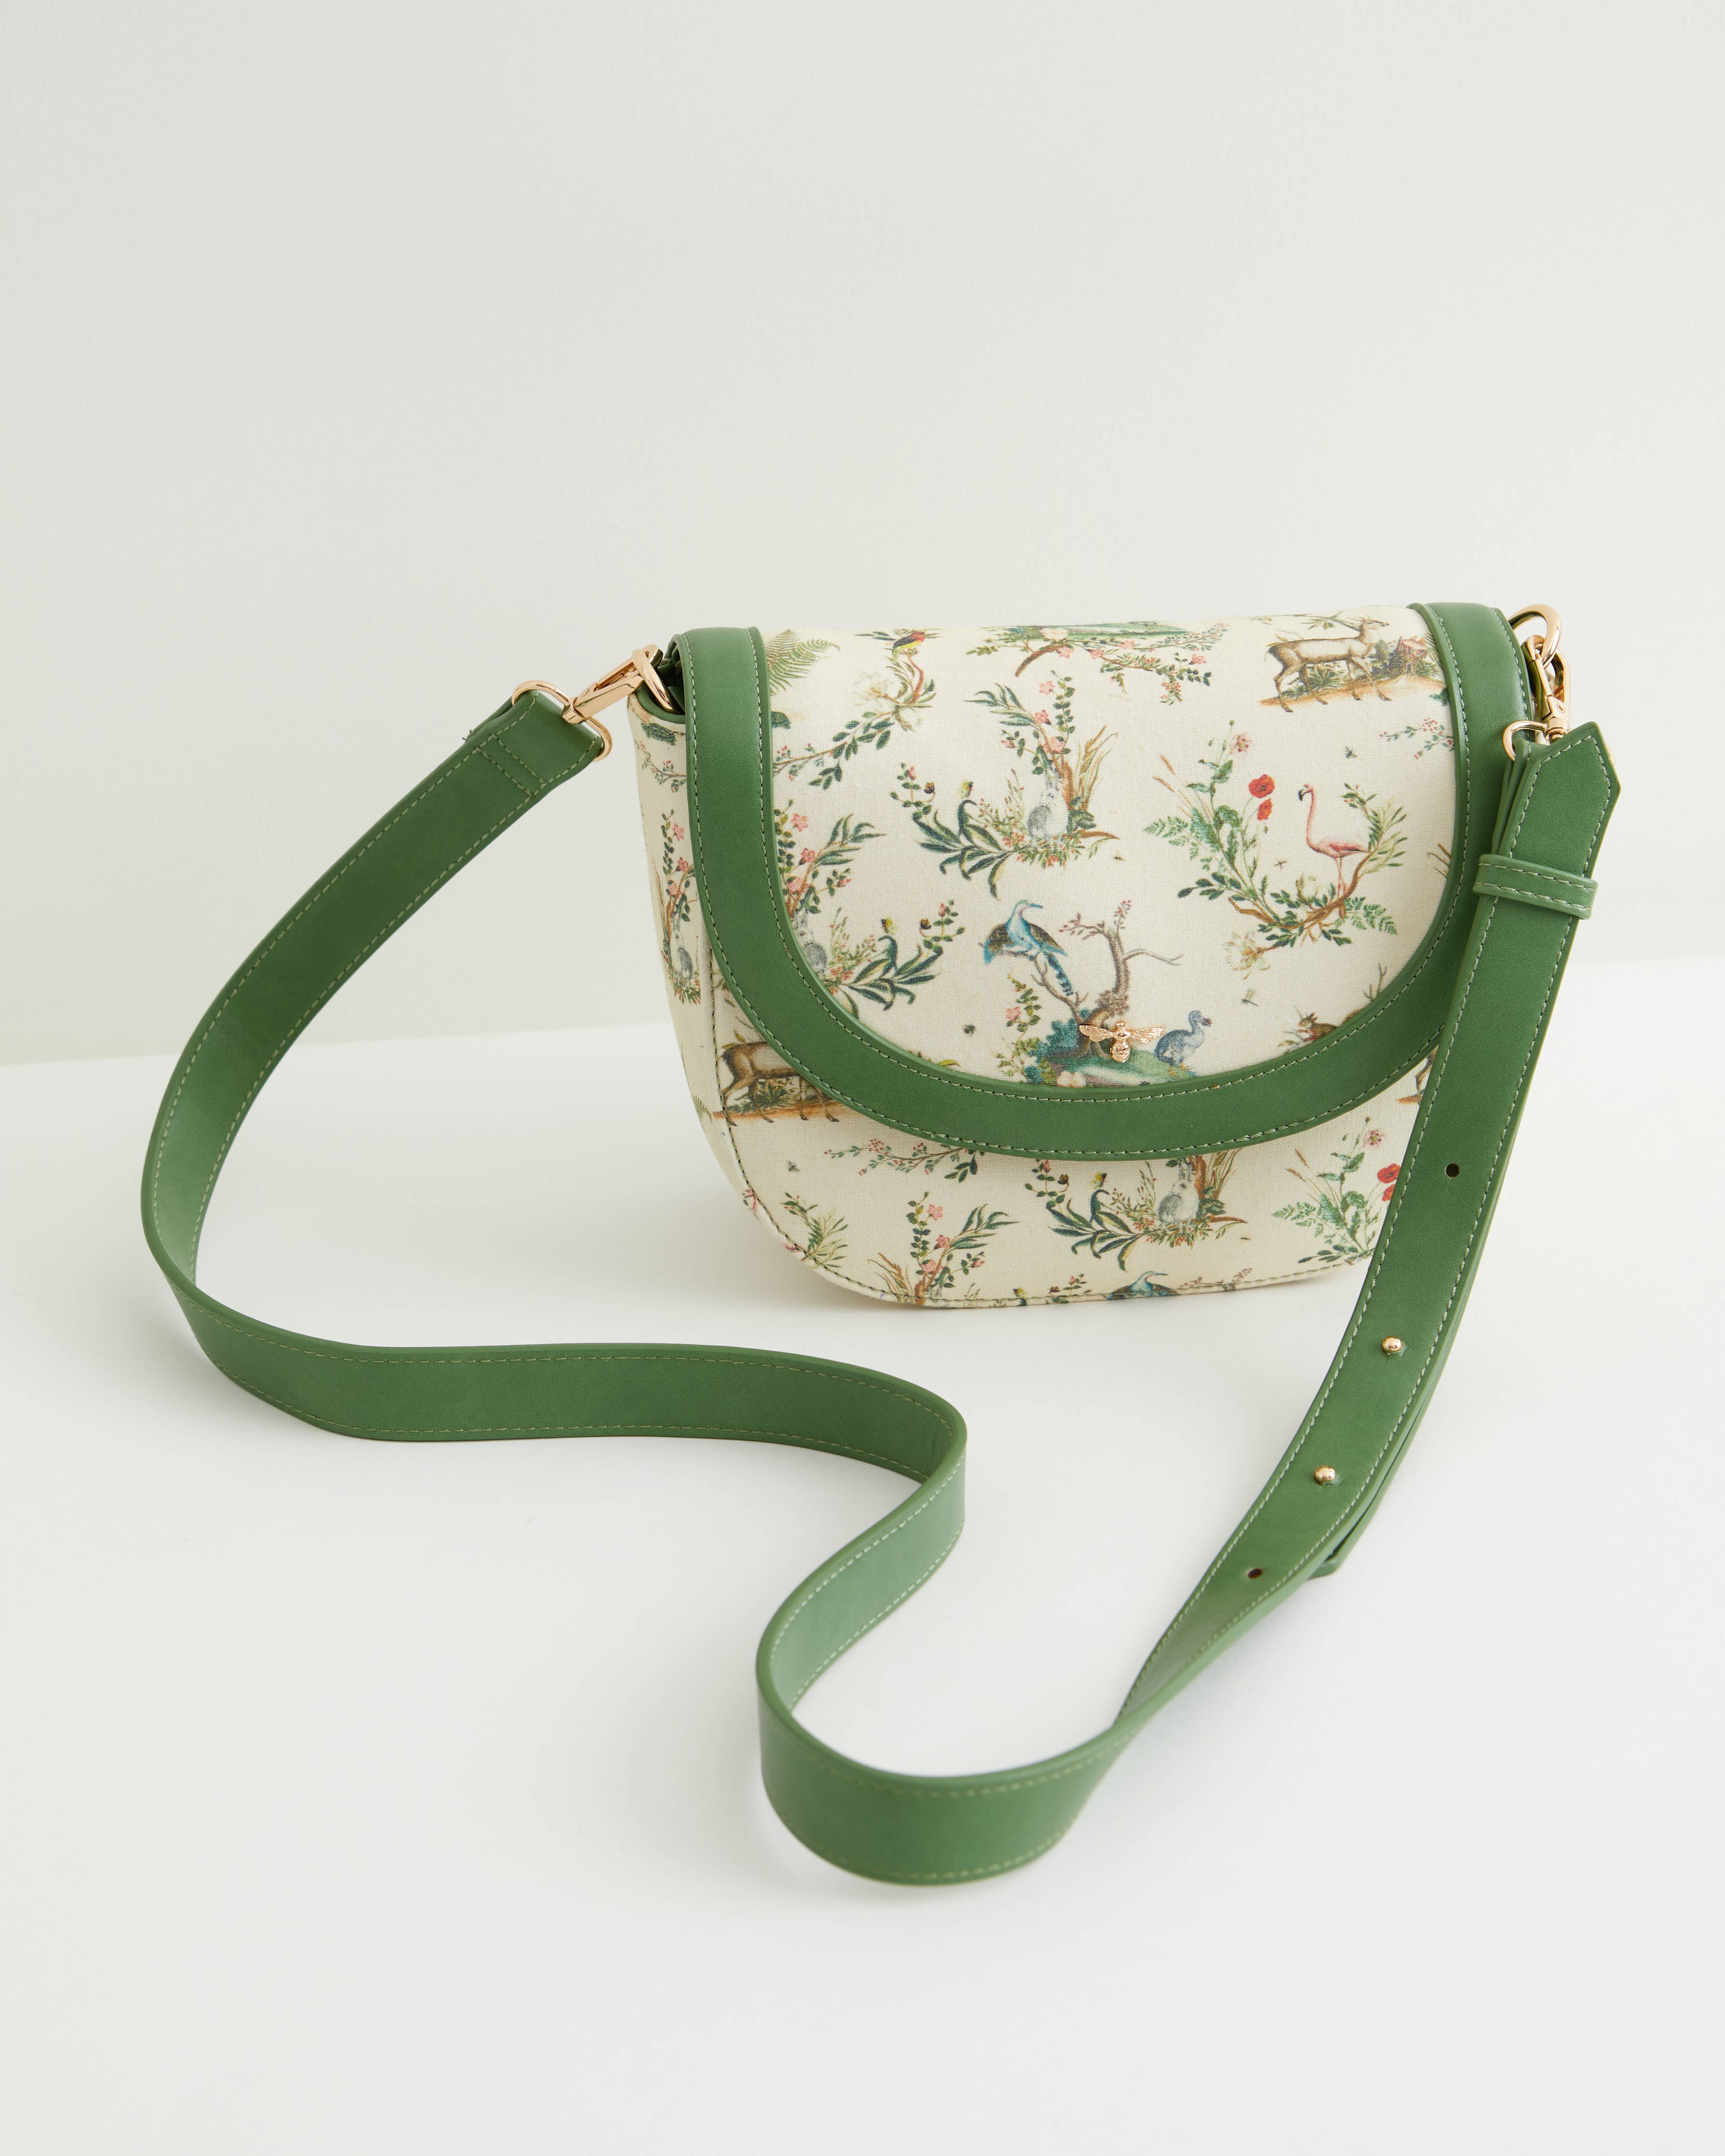 Toile de Jouy Saddle Bag - Out of the Blue